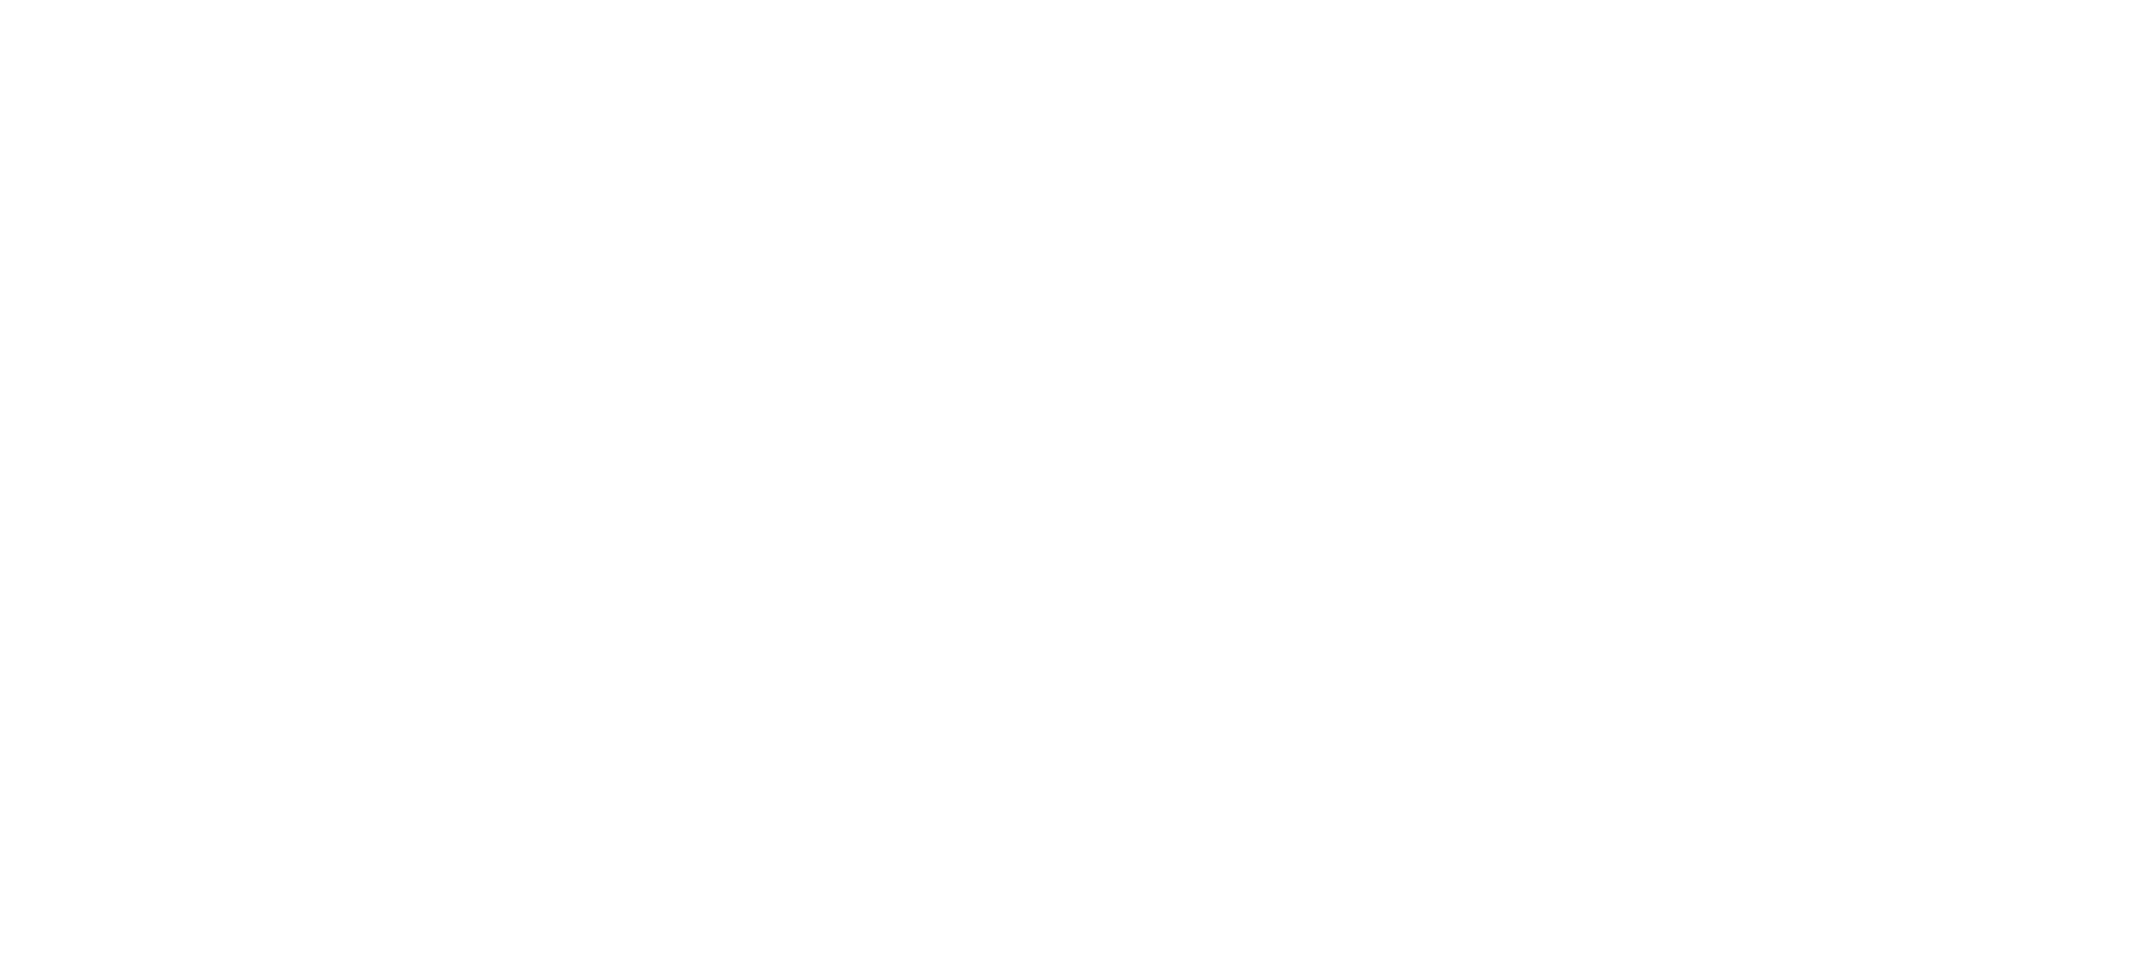 Lost Backpackers